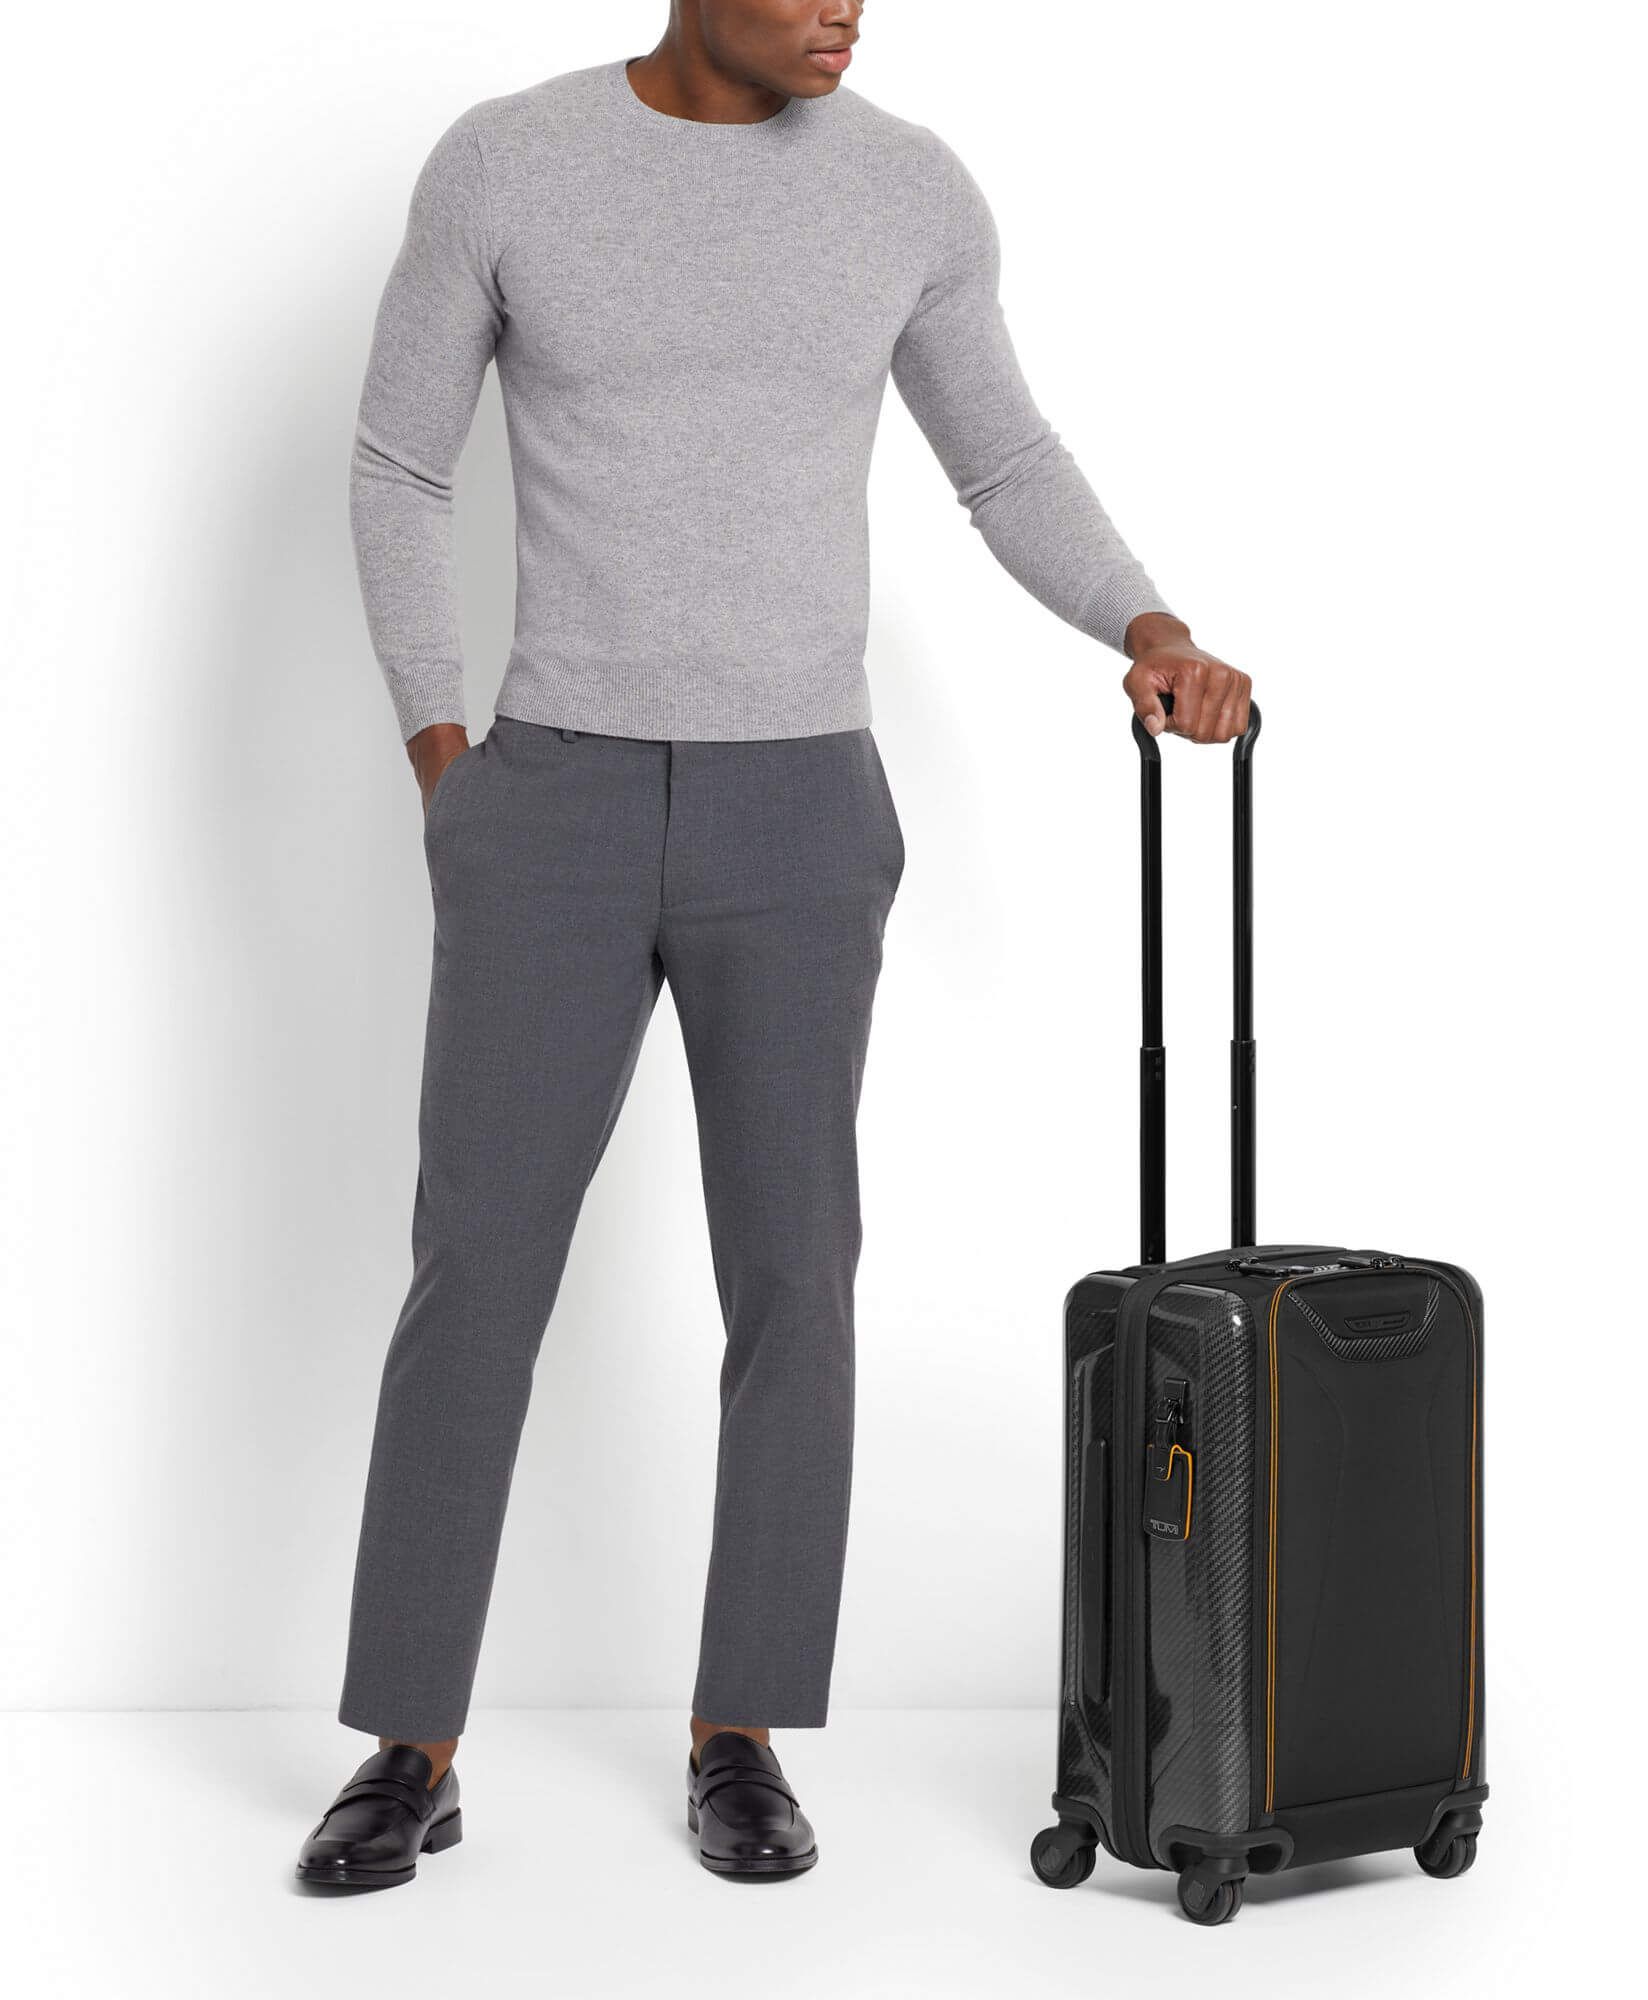 tumi mclaren carry on black with handle wheeled by man in grey outfit